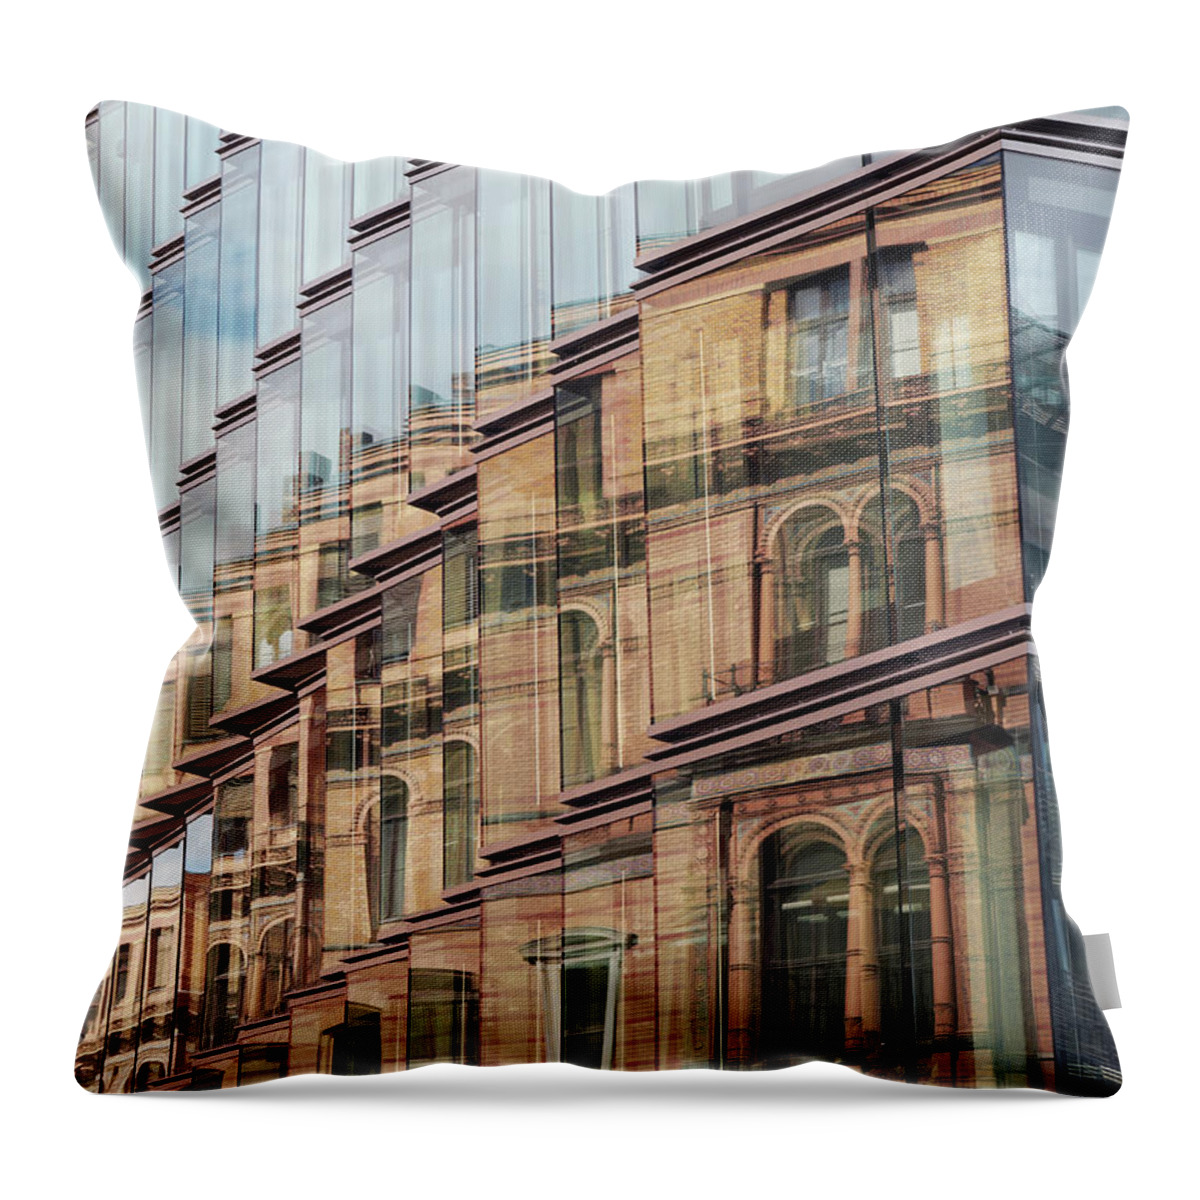 Berlin Throw Pillow featuring the photograph Germany, Berlin, View Of Parliament by Westend61